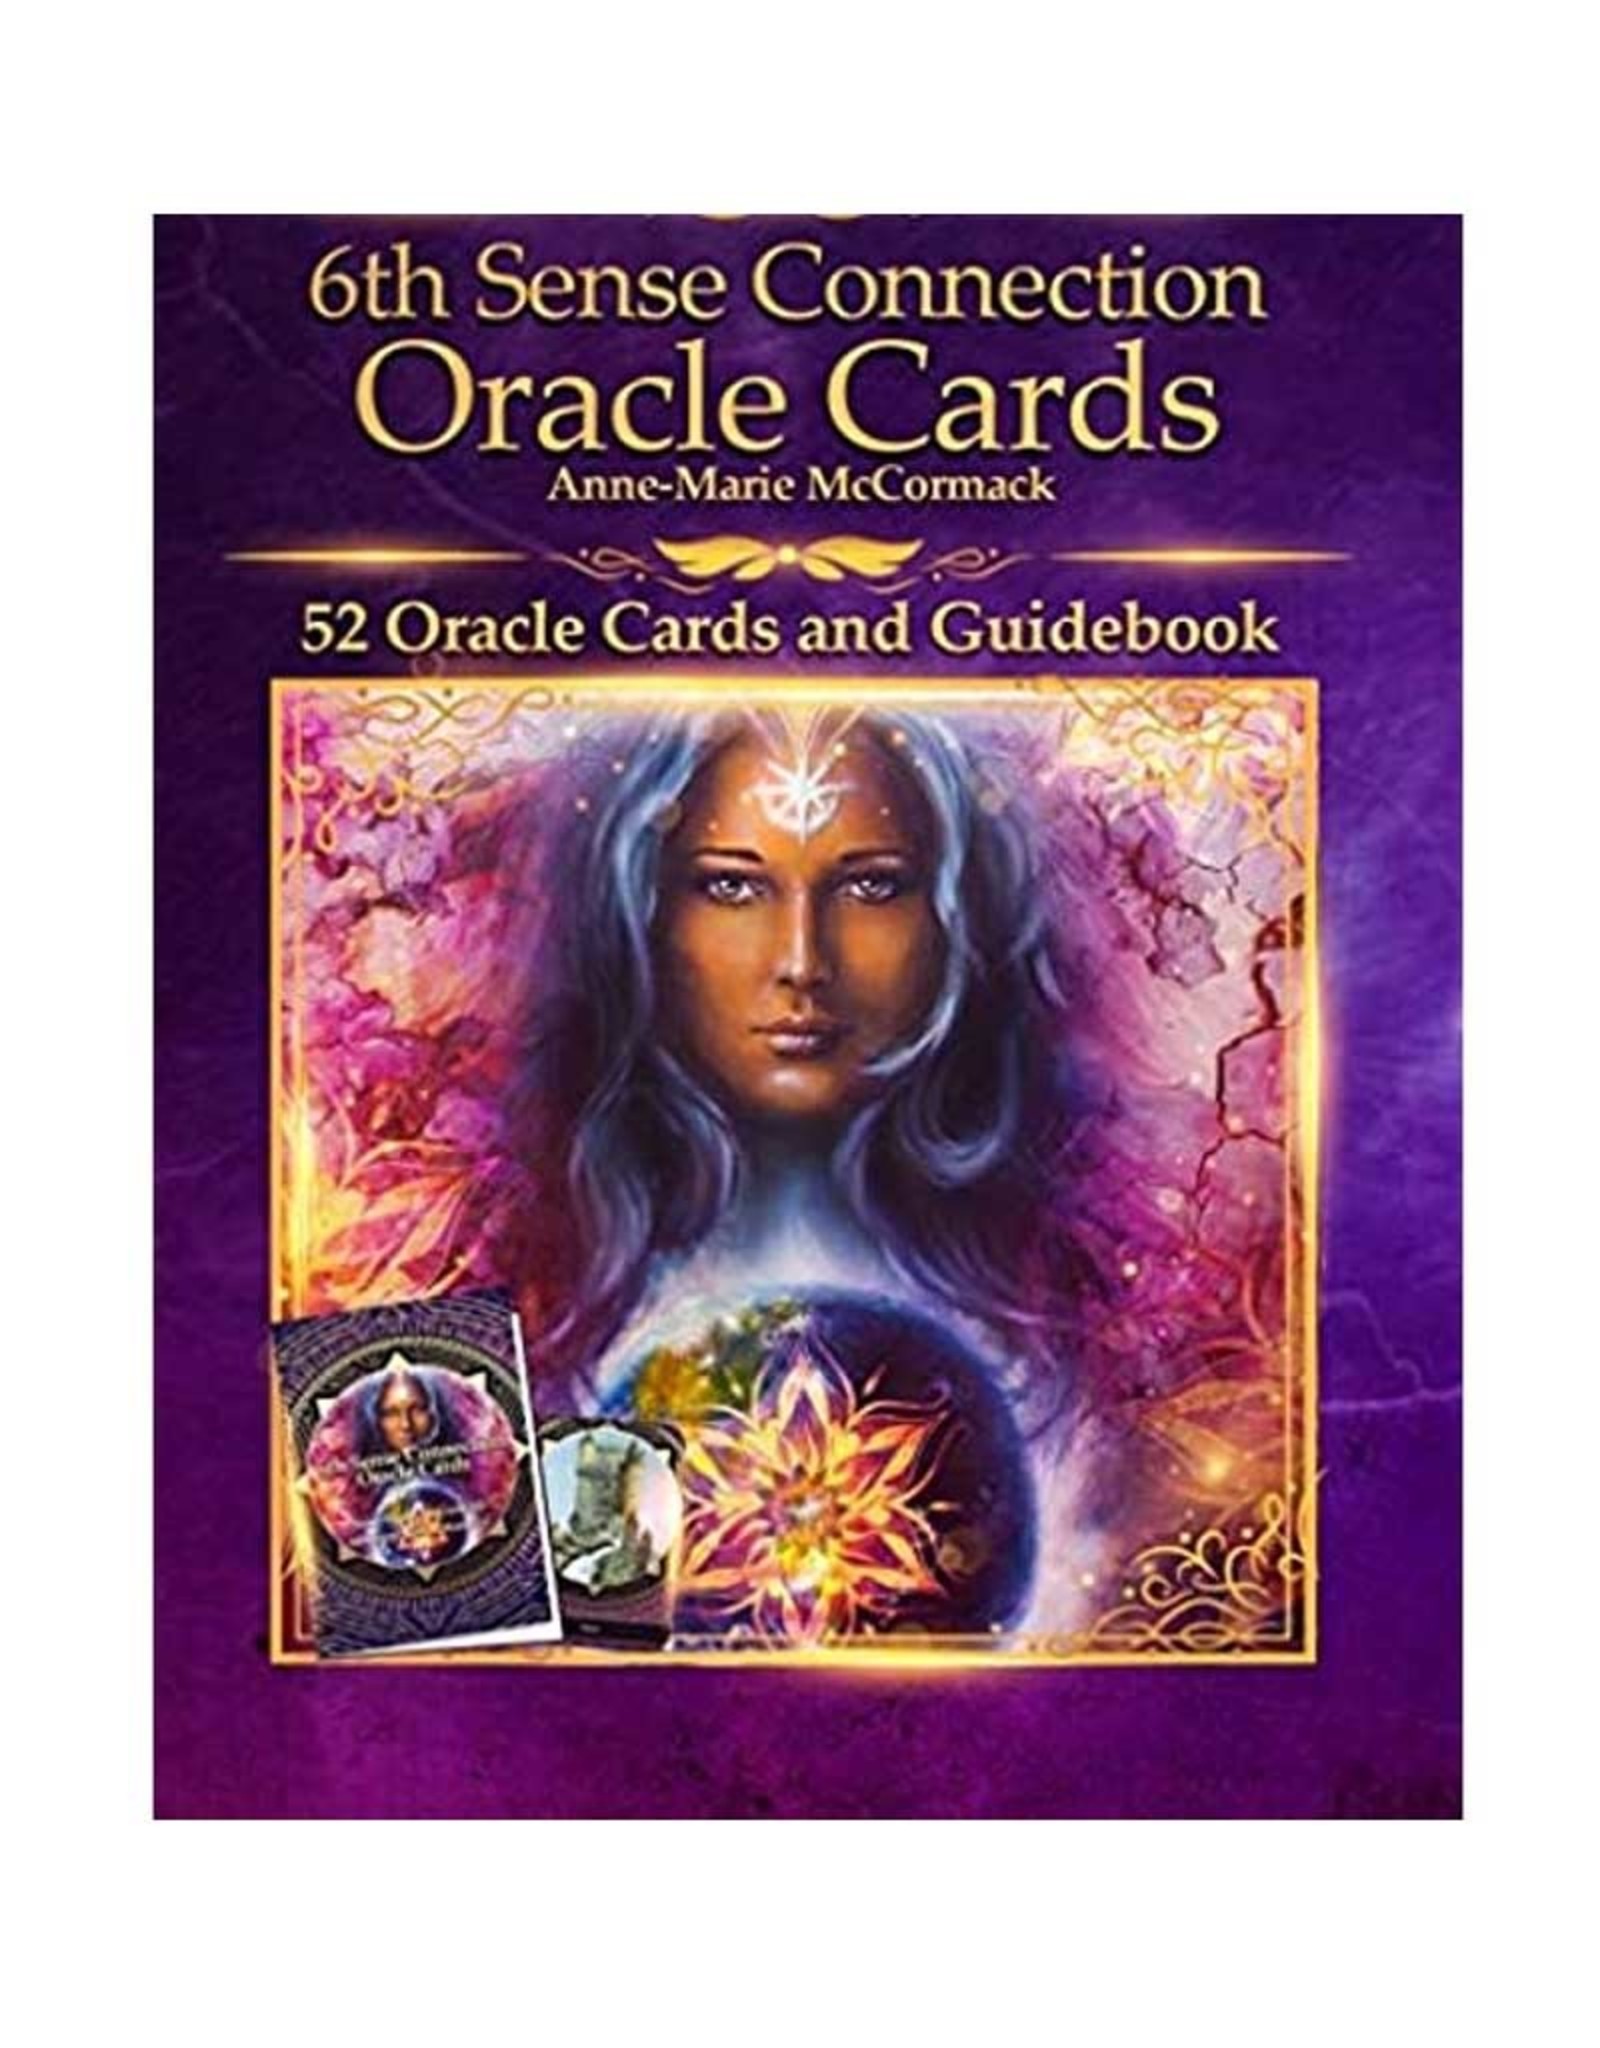 Anne-Marie McCormack 6th Sense Connection Oracle by Anne-Marie McCormack